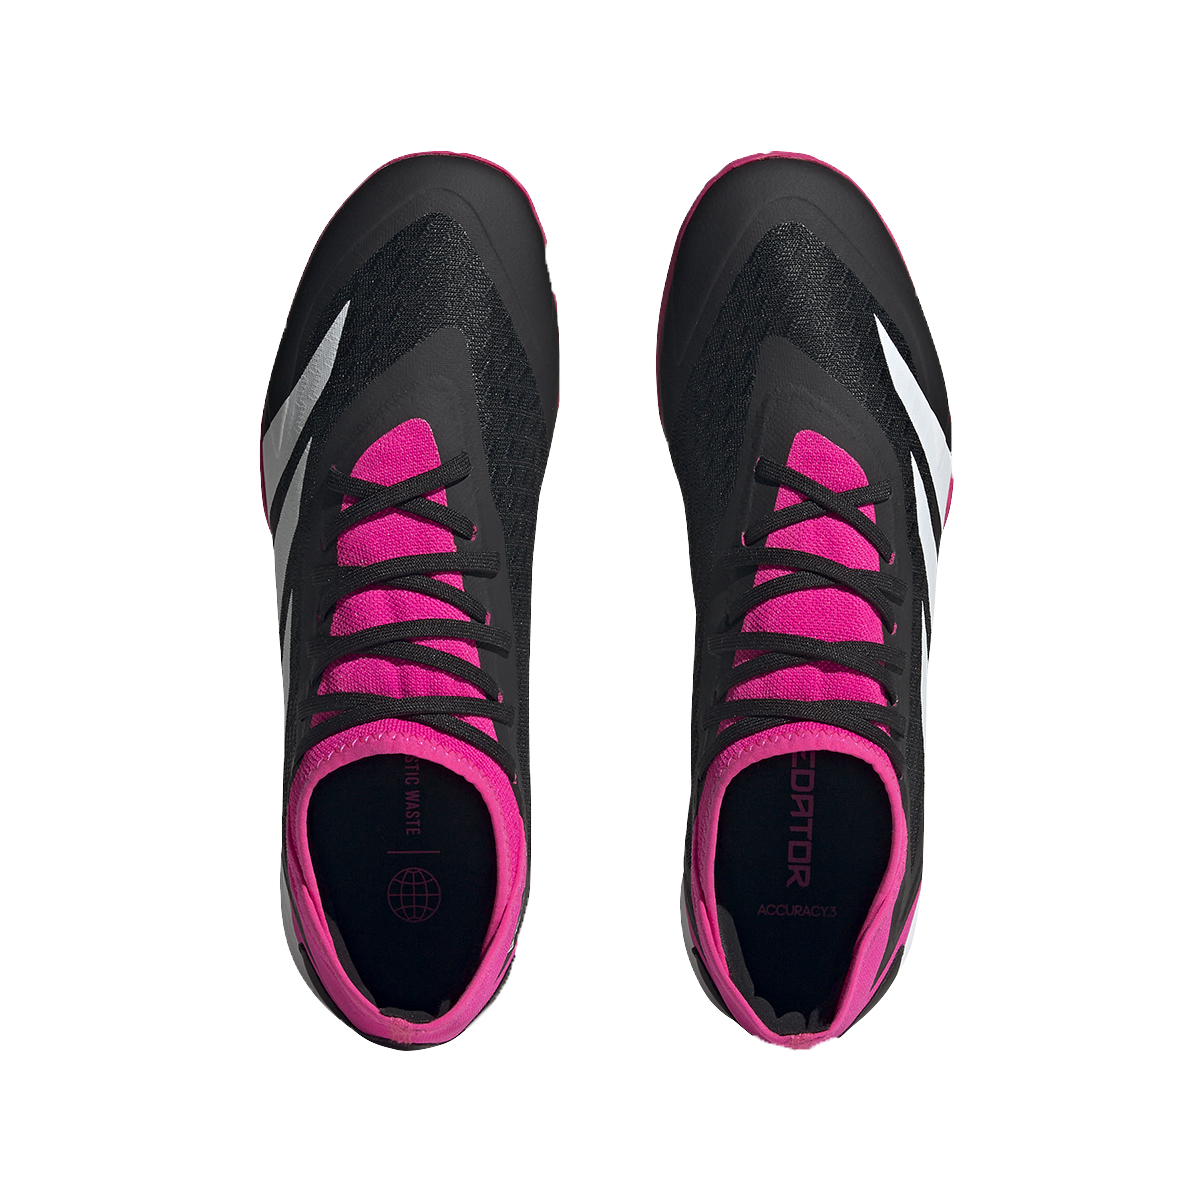 Botines adidas Predator Accuracy 3 In,  image number null